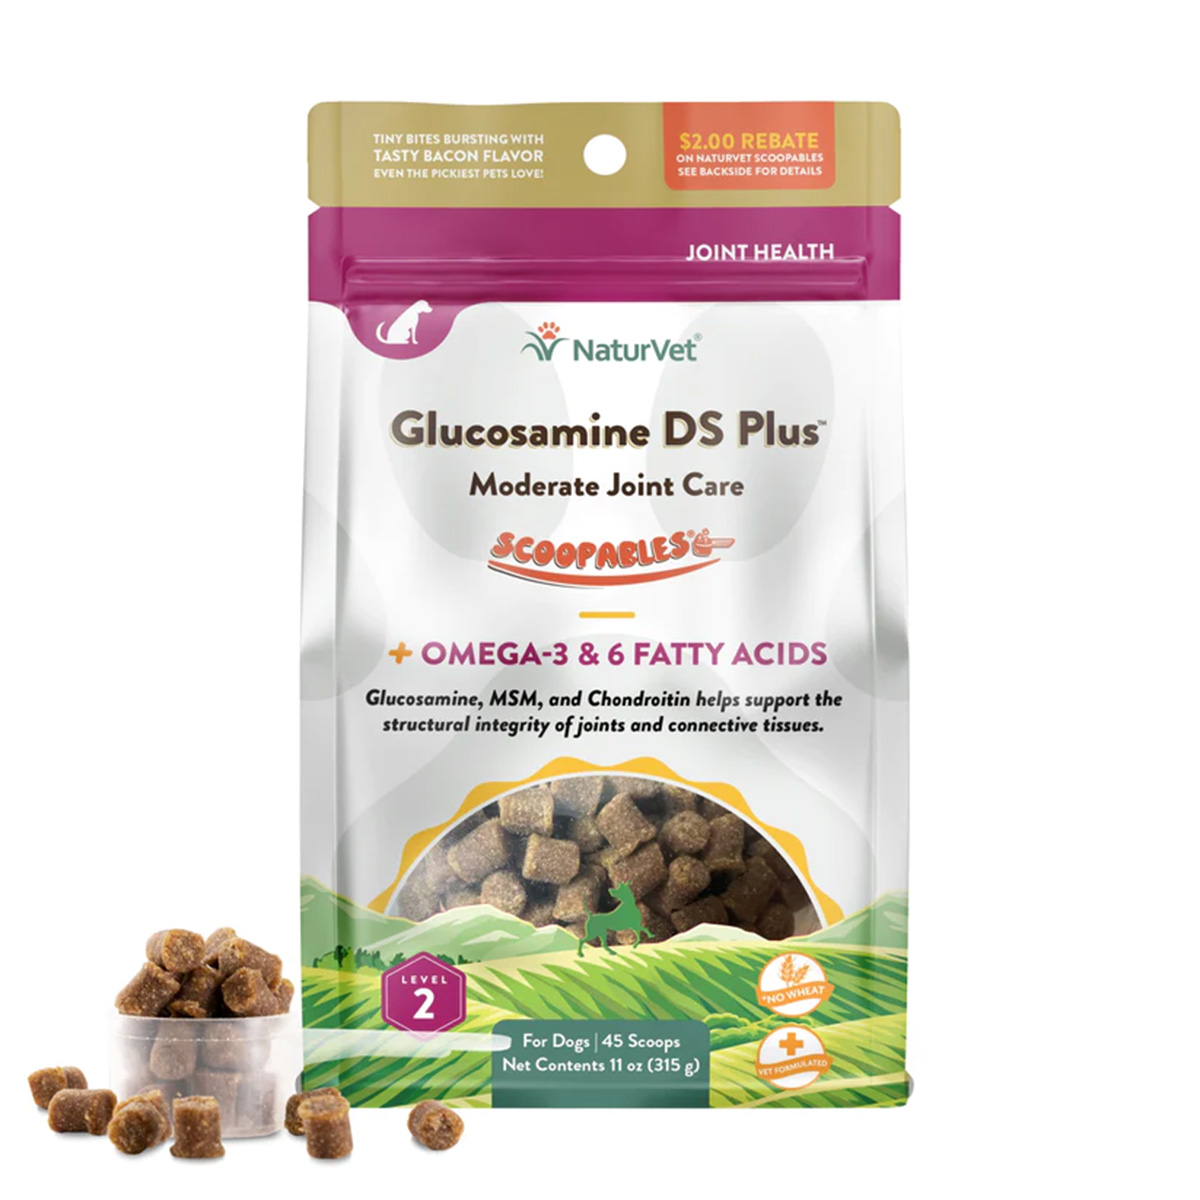 NaturVet Scoopables Glucosamine DS Plus Level 2 Moderate Joint Care Dog Soft Chews